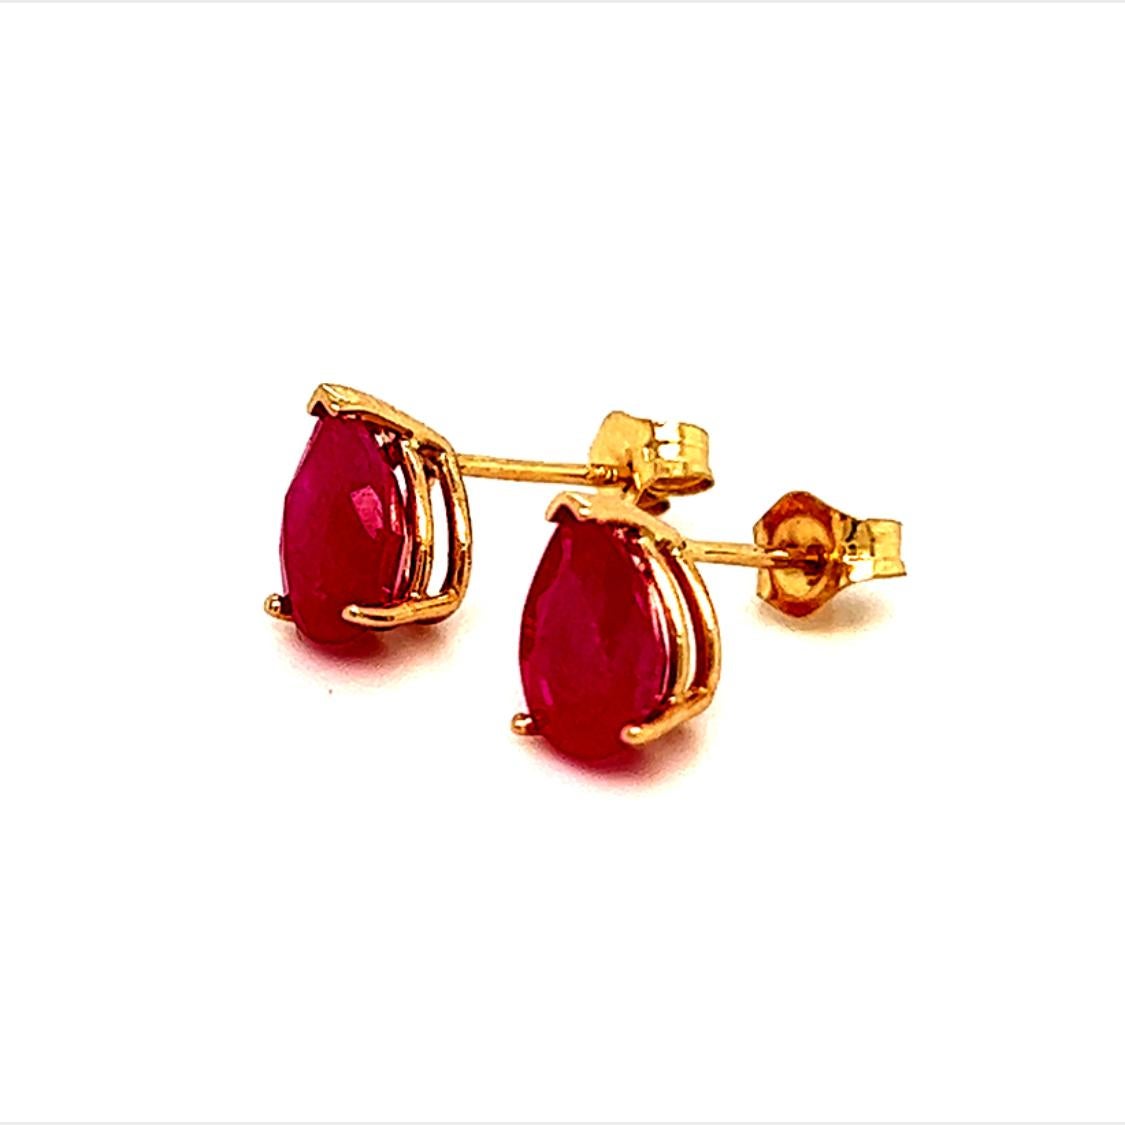 Natural Ruby Stud Earrings 14k Gold 3.68 mm 2.40 TCW Certified $2,090 215093

This is a Unique Custom Made Glamorous Piece of Jewelry!

Nothing says, “I Love you” more than Diamonds and Pearls!

These Ruby earrings have been Certified, Inspected,